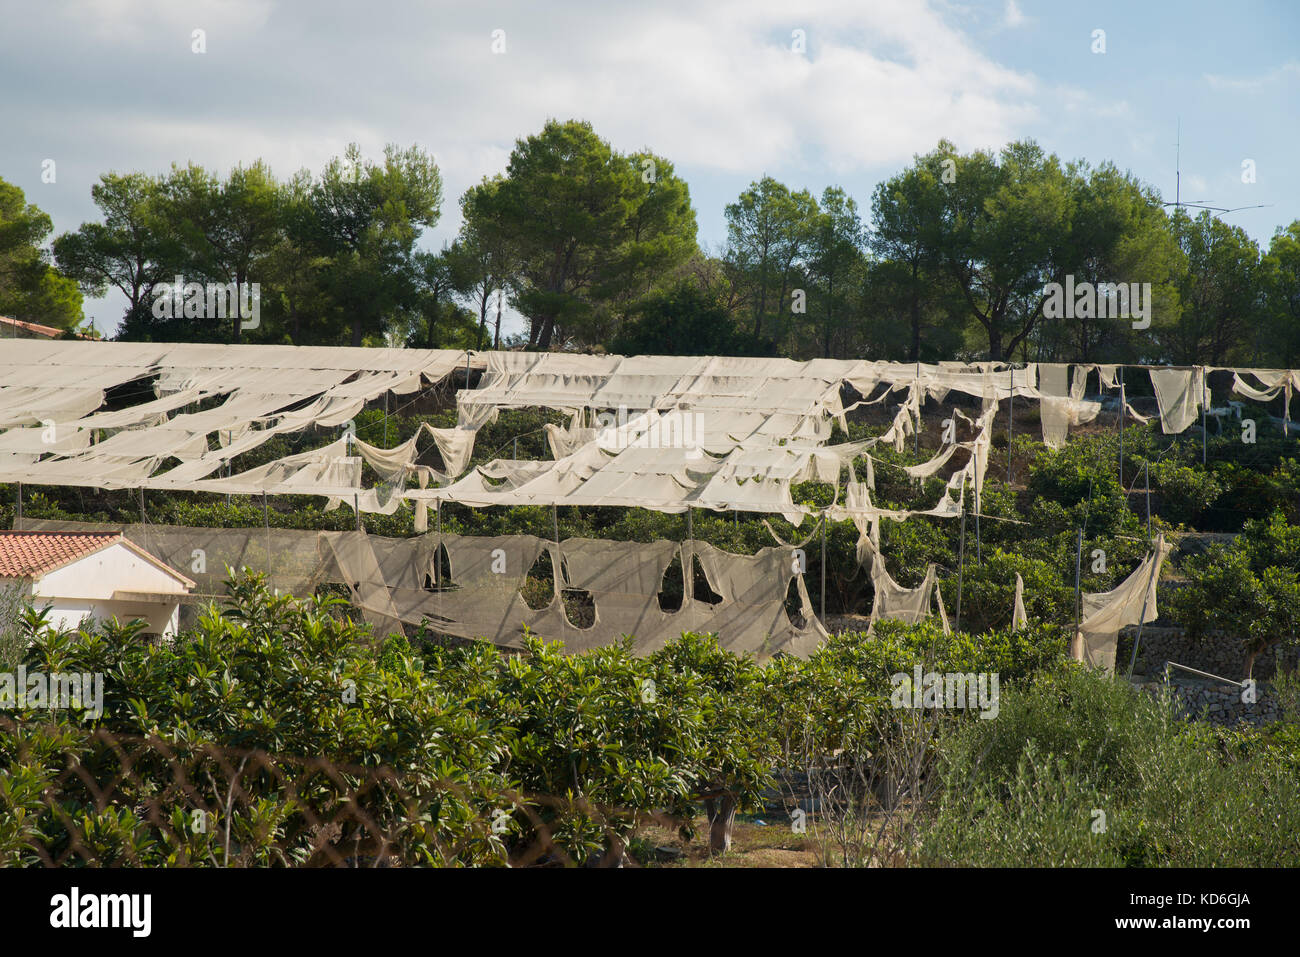 Destroyed greenhouses in the aftermath of a storm on a citrus plantation Stock Photo